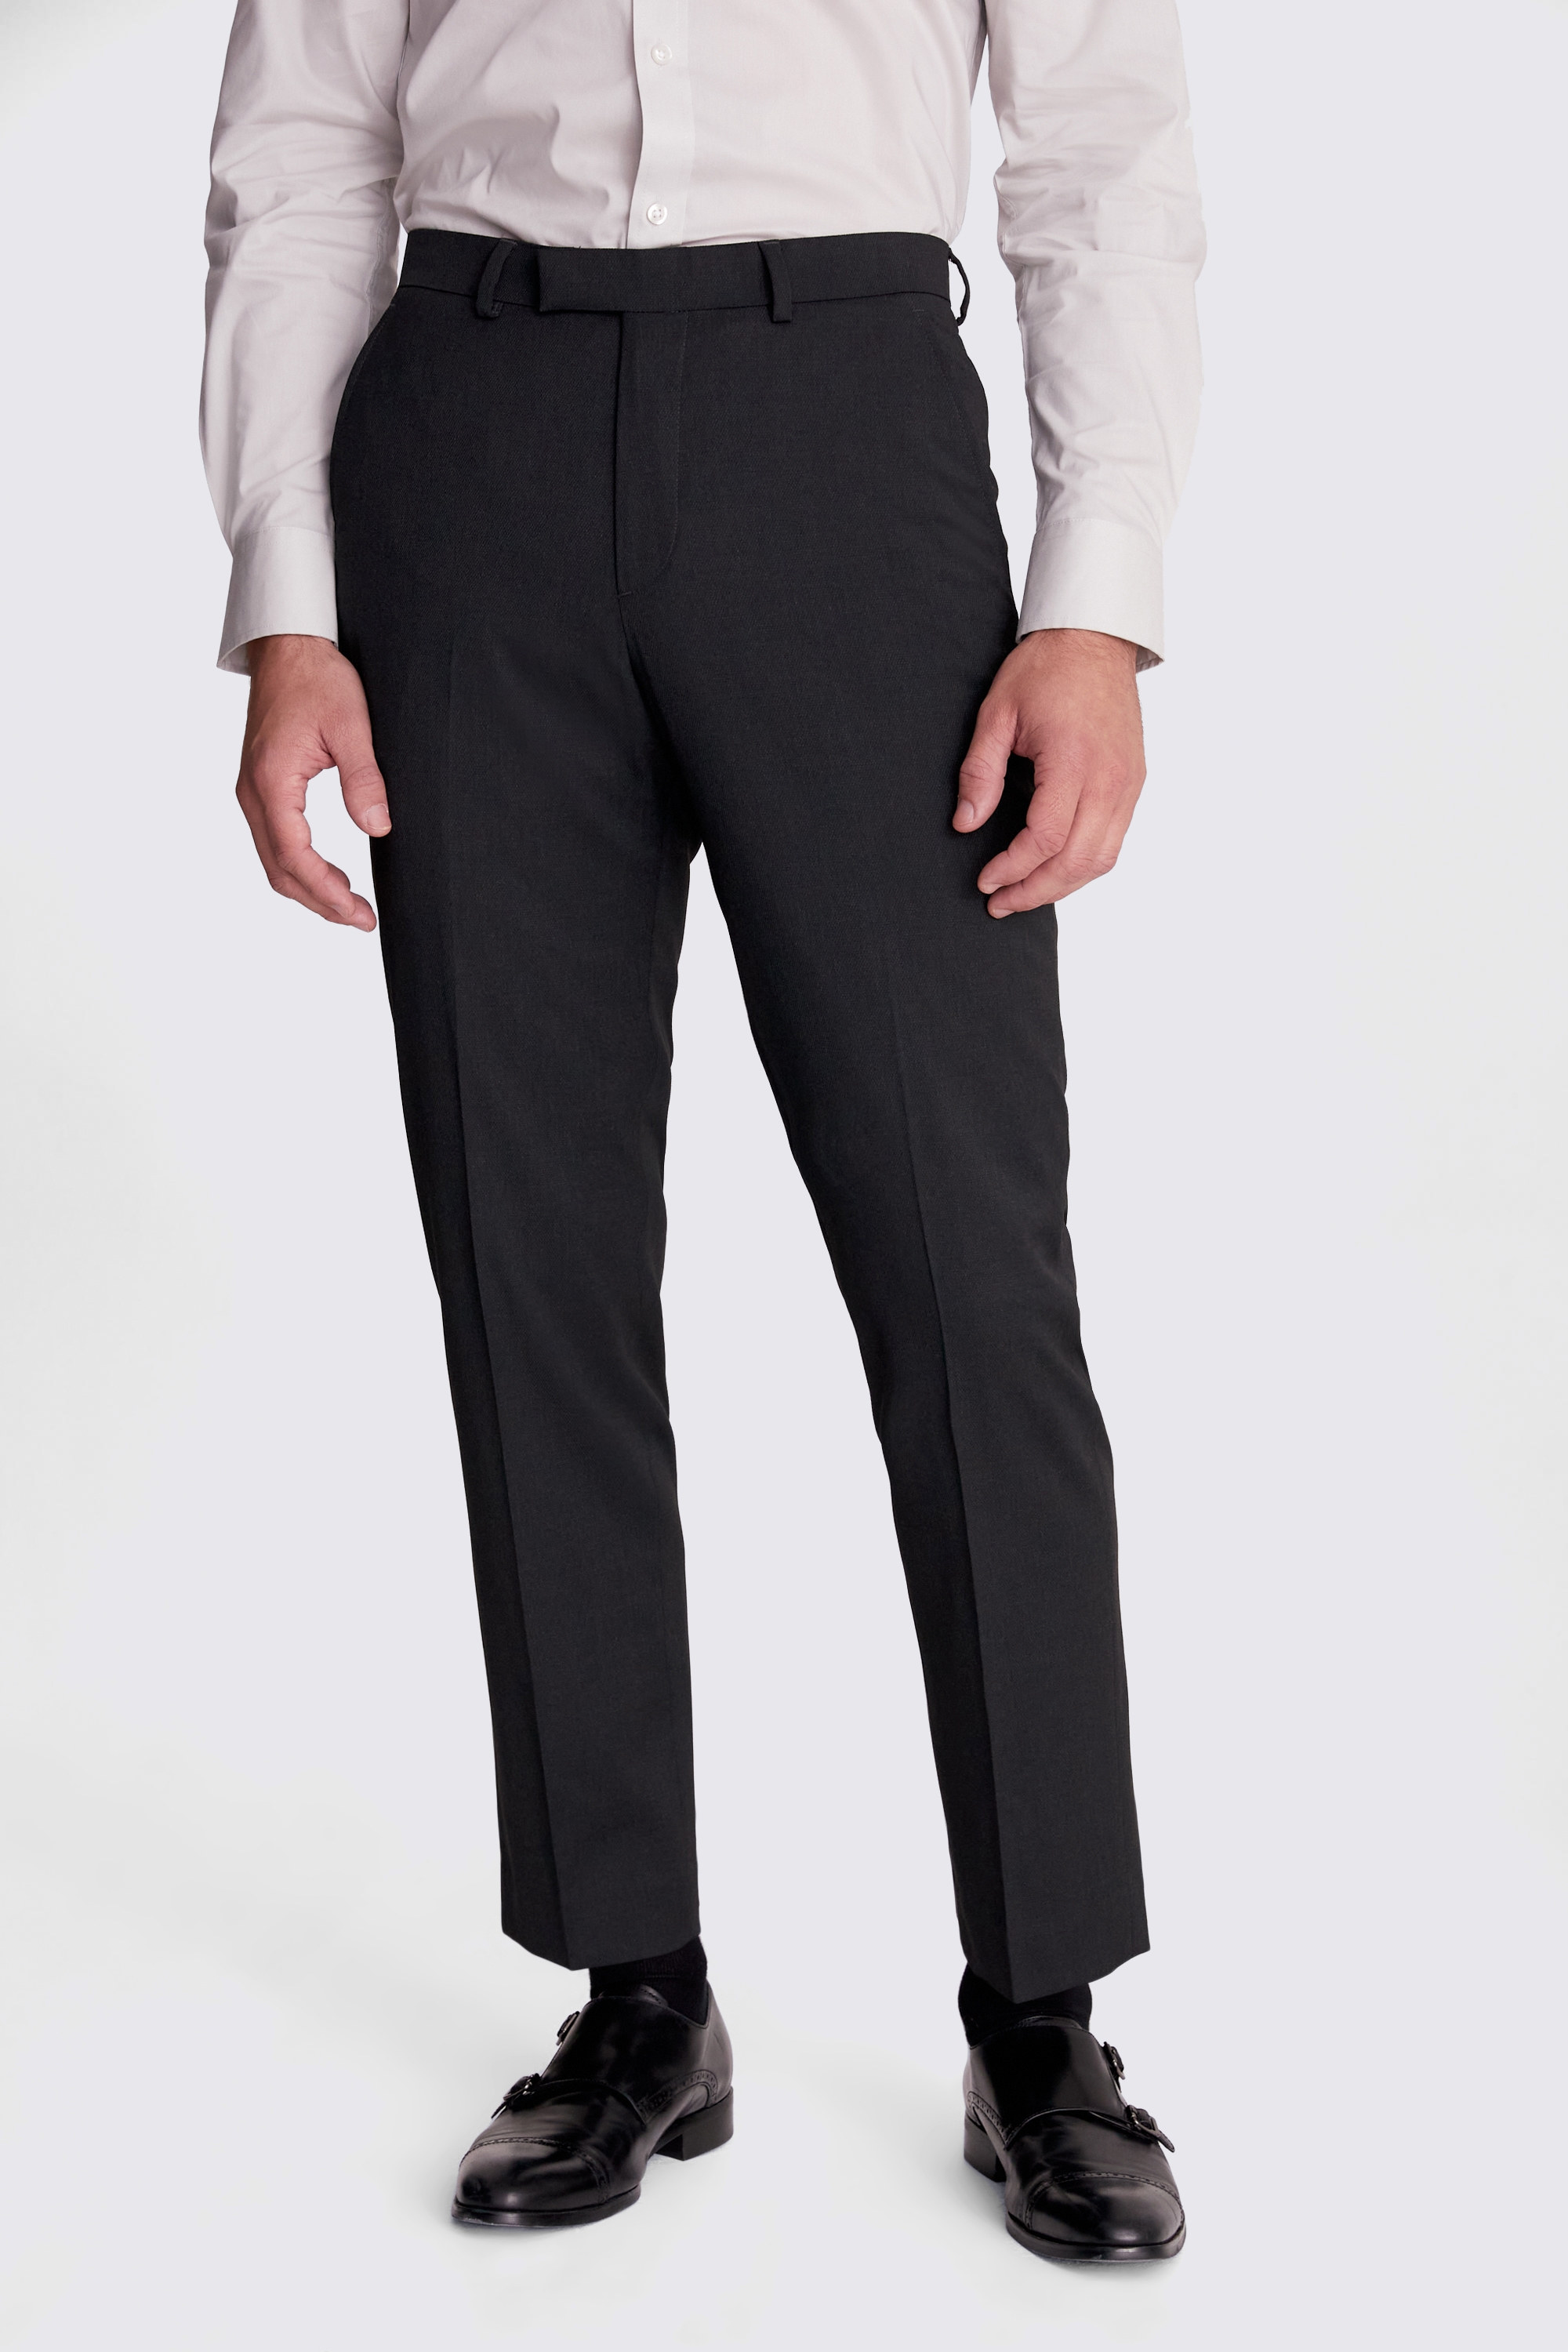 Regular Fit Charcoal Stretch Trousers | Buy Online at Moss